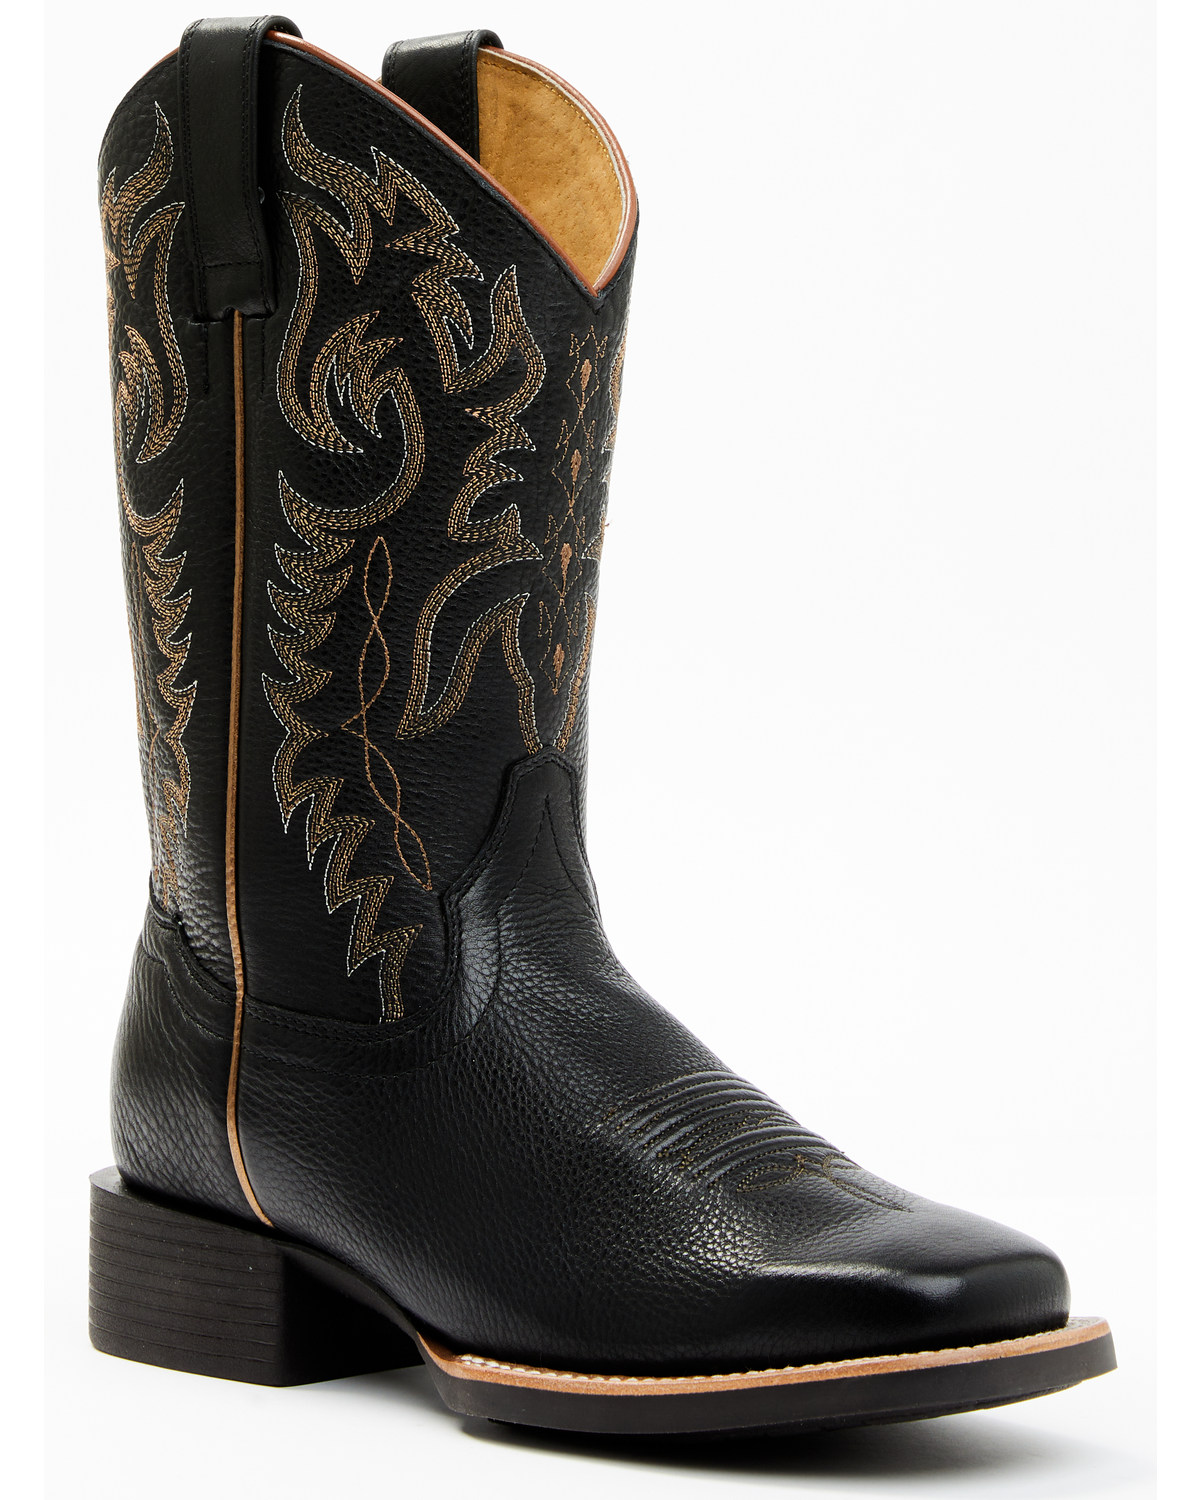 Shyanne Women's Shay Western Performance Boots - Square Toe